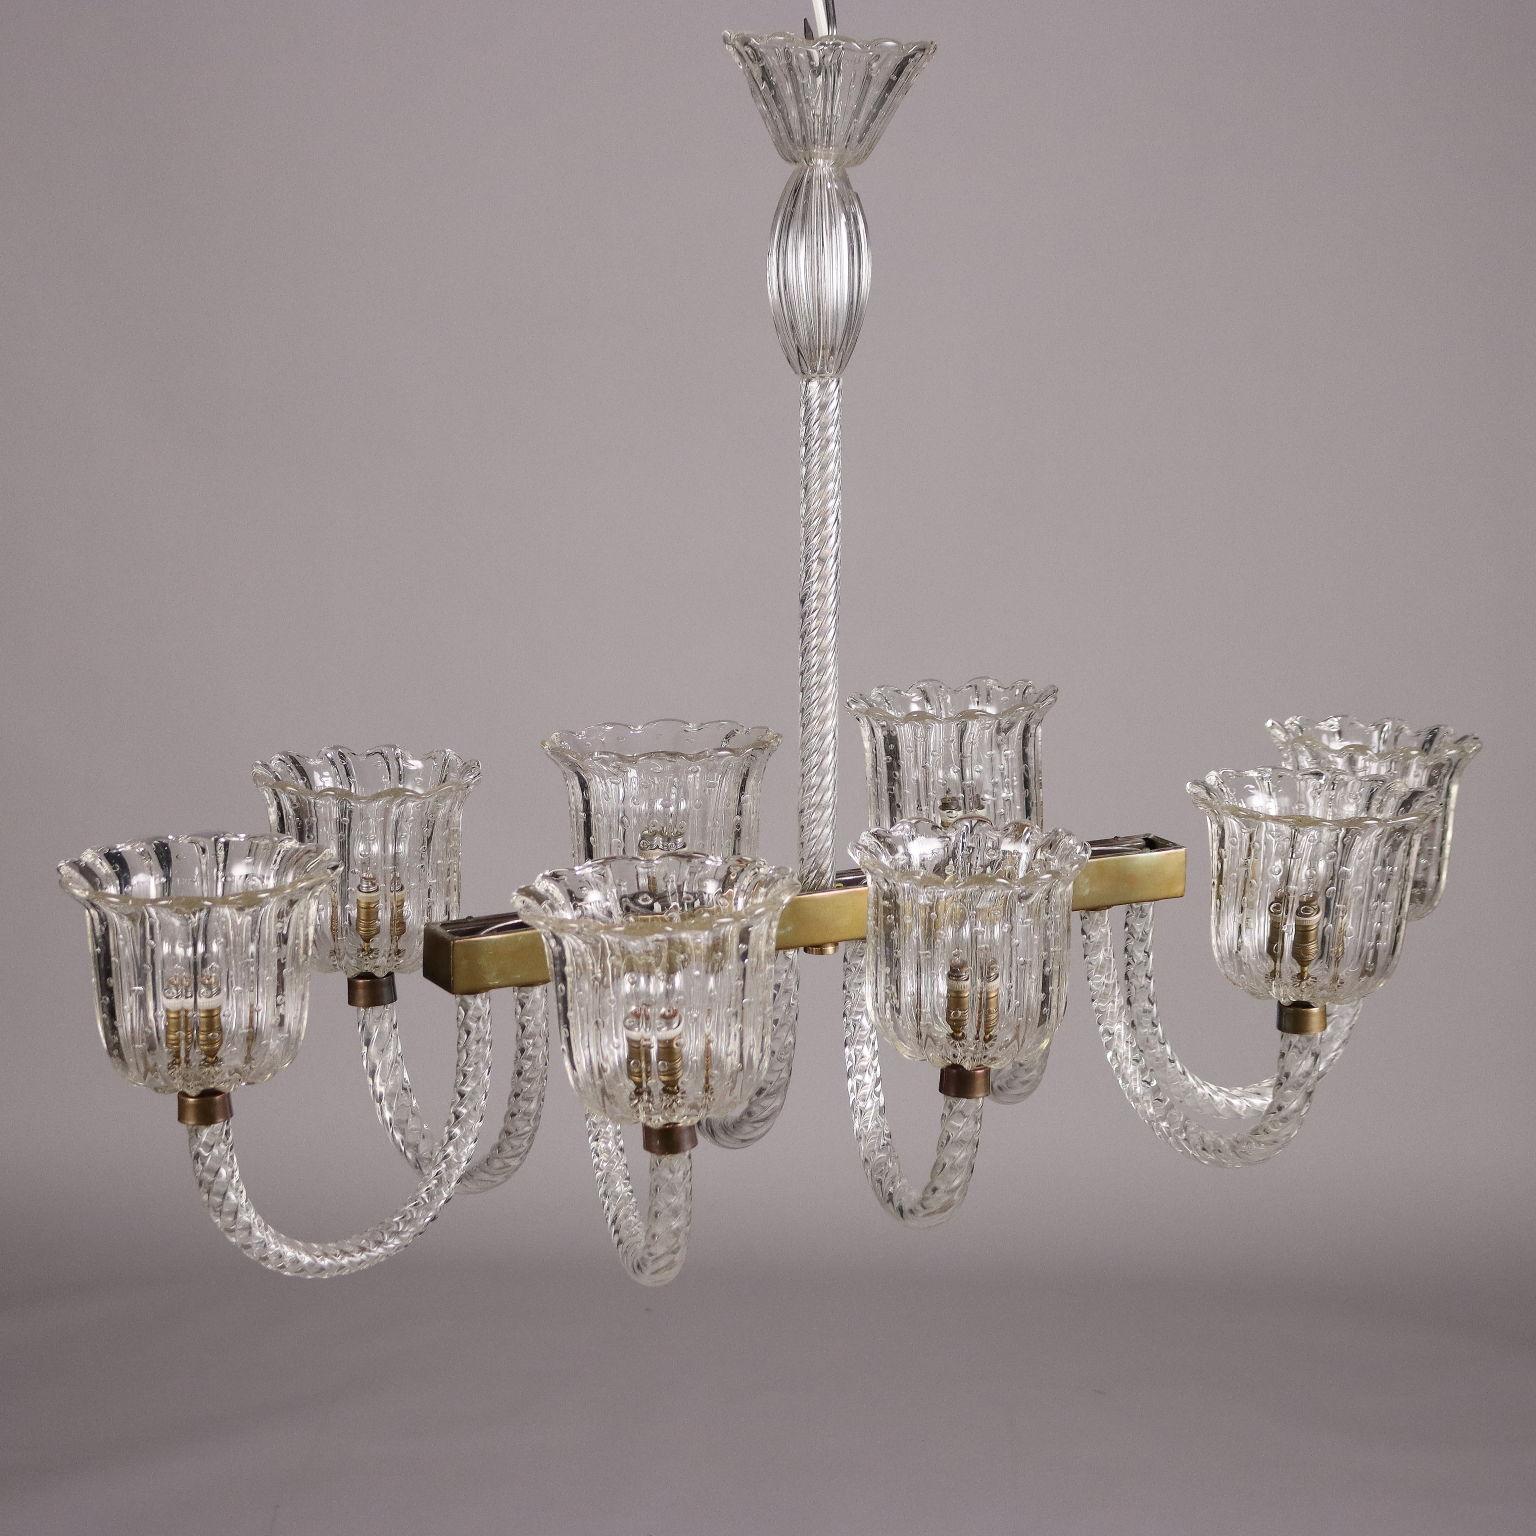 1940s Italian Manufacture Chandelier, Murano Glass In Excellent Condition For Sale In Milano, IT